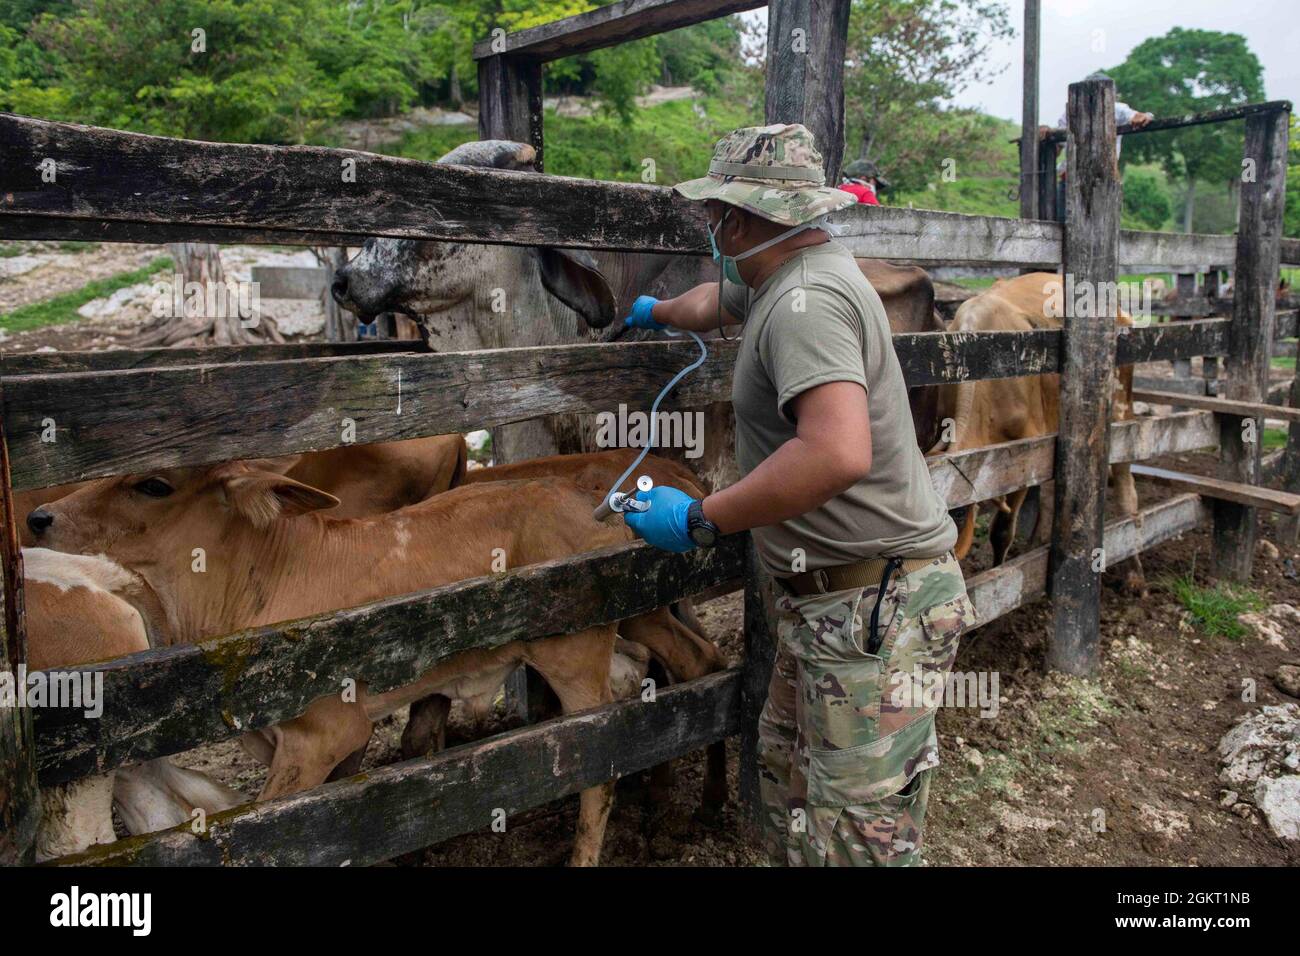 U.S. Army Staff Sgt. Rene Aventura, a field veterinary service technician with the 109th Medical Detachment Veterinary Services out of Garden Grove, California, vaccinates cattle during the Veterinary Readiness Training Exercises portion of Resolute Sentinel 21 in Melchor De Mencos, Guatemala, June 24, 2021. Resolute Sentinel provides joint training and improved readiness of U.S. and partner nation veterinary professionals and support personnel through humanitarian assistance activities. Stock Photo